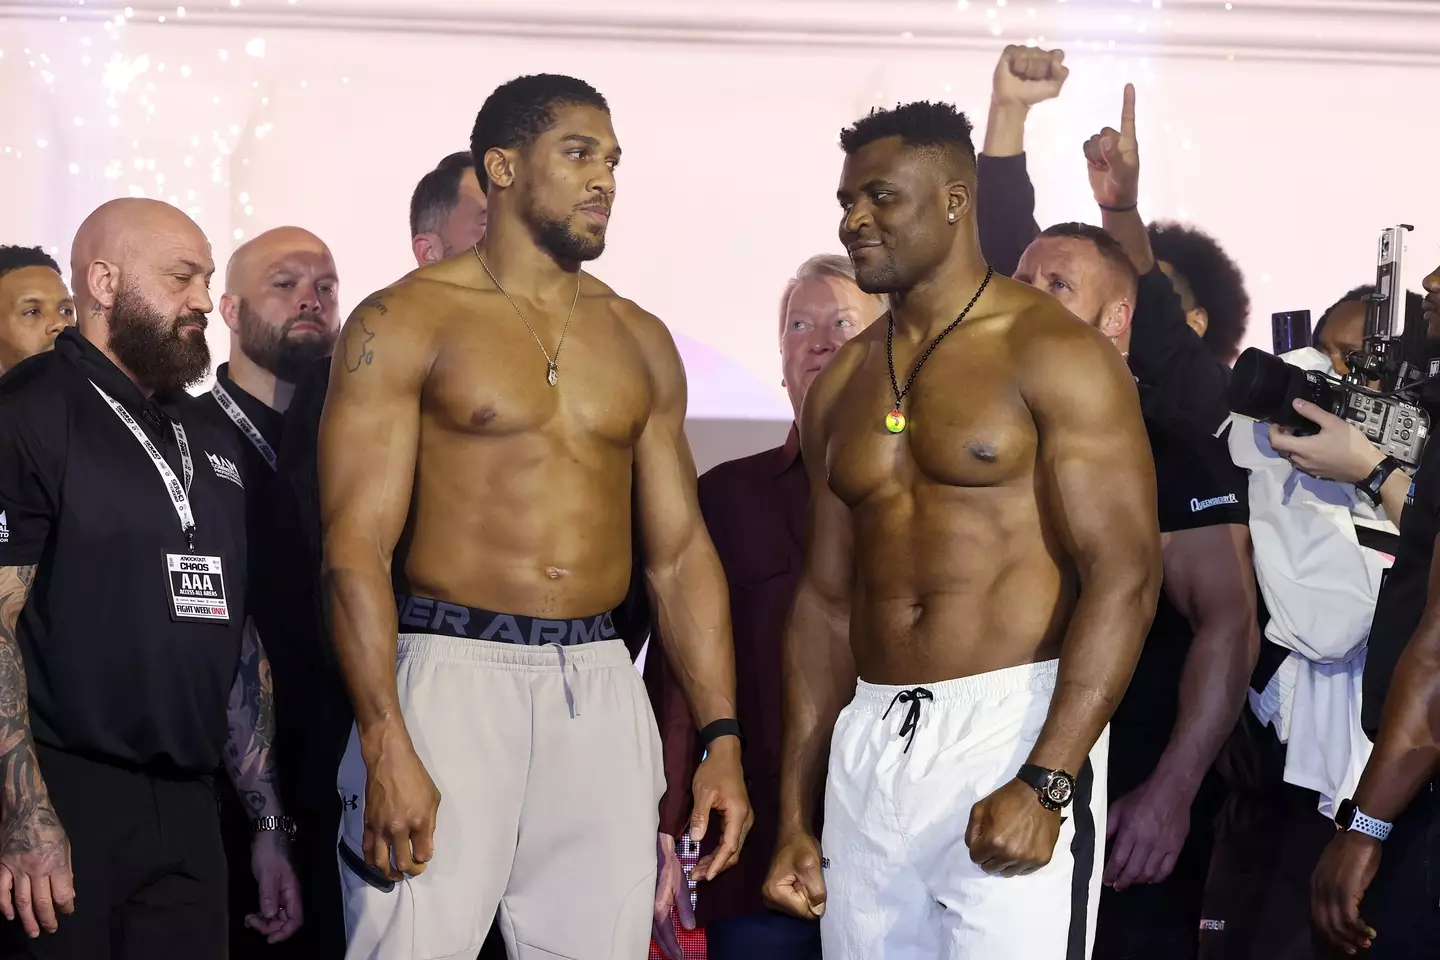 Joshua and Ngannou's bout takes place in Saudi Arabia on Friday (Getty)